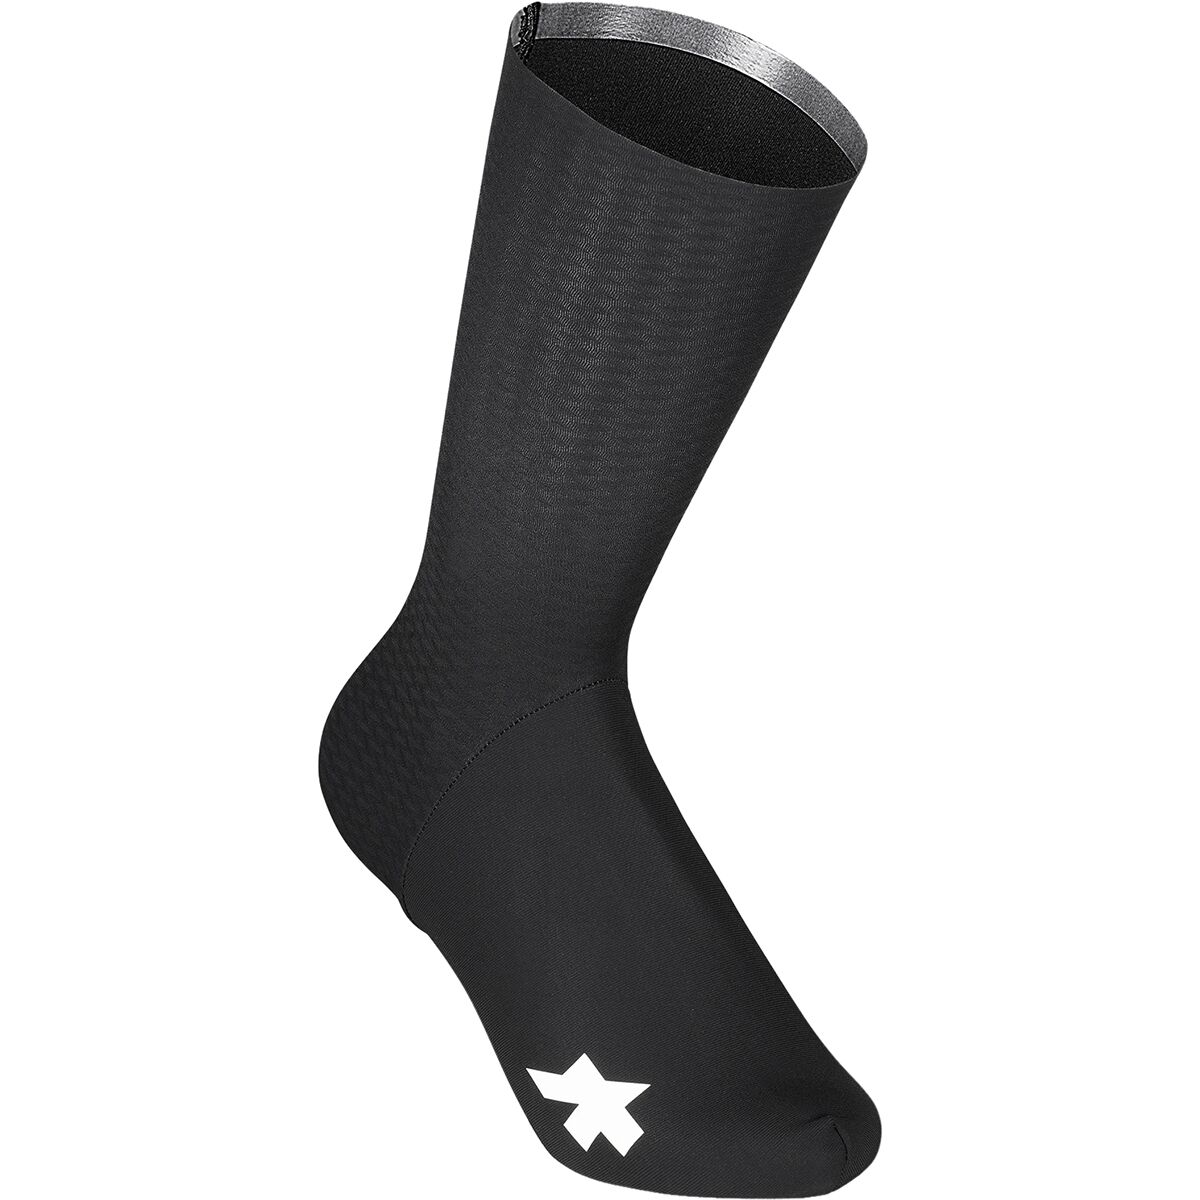 Cycling Socks - Bicycle Socks | Competitive Cyclist